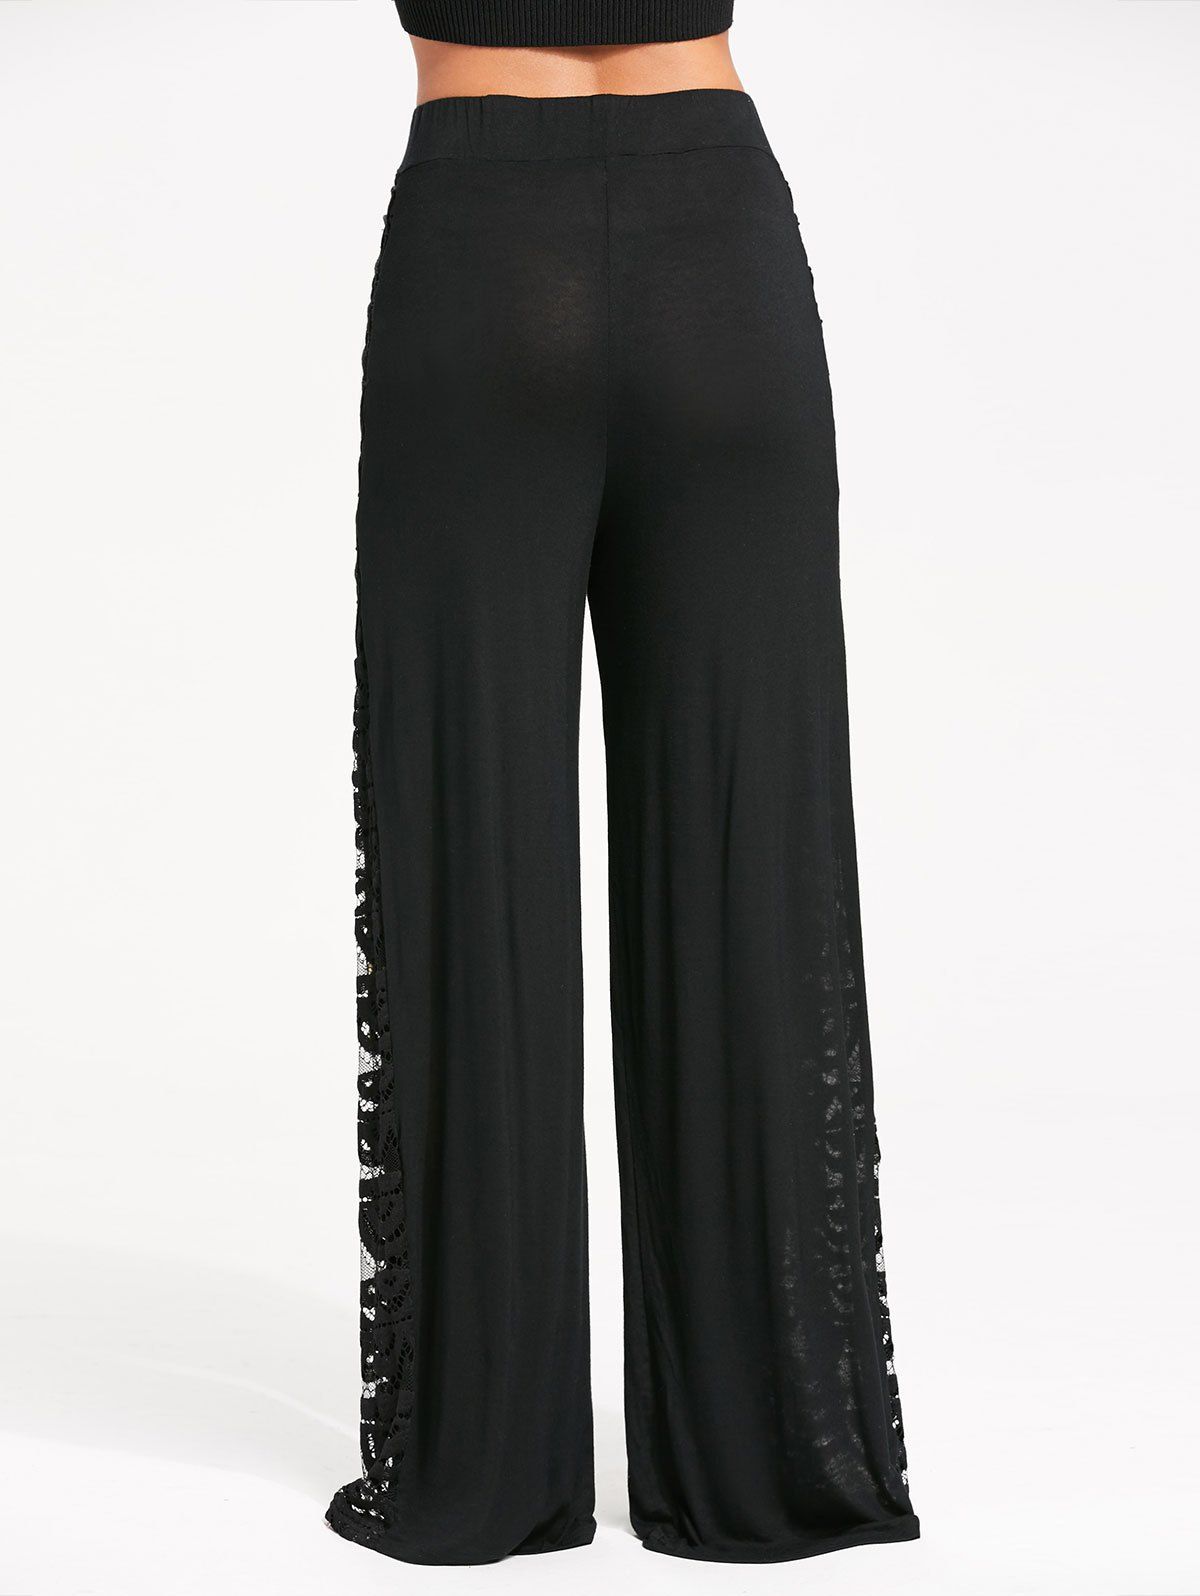 2018 Criss Cross and Lace Panel Palazzo Pants BLACK S In Pants Online ...